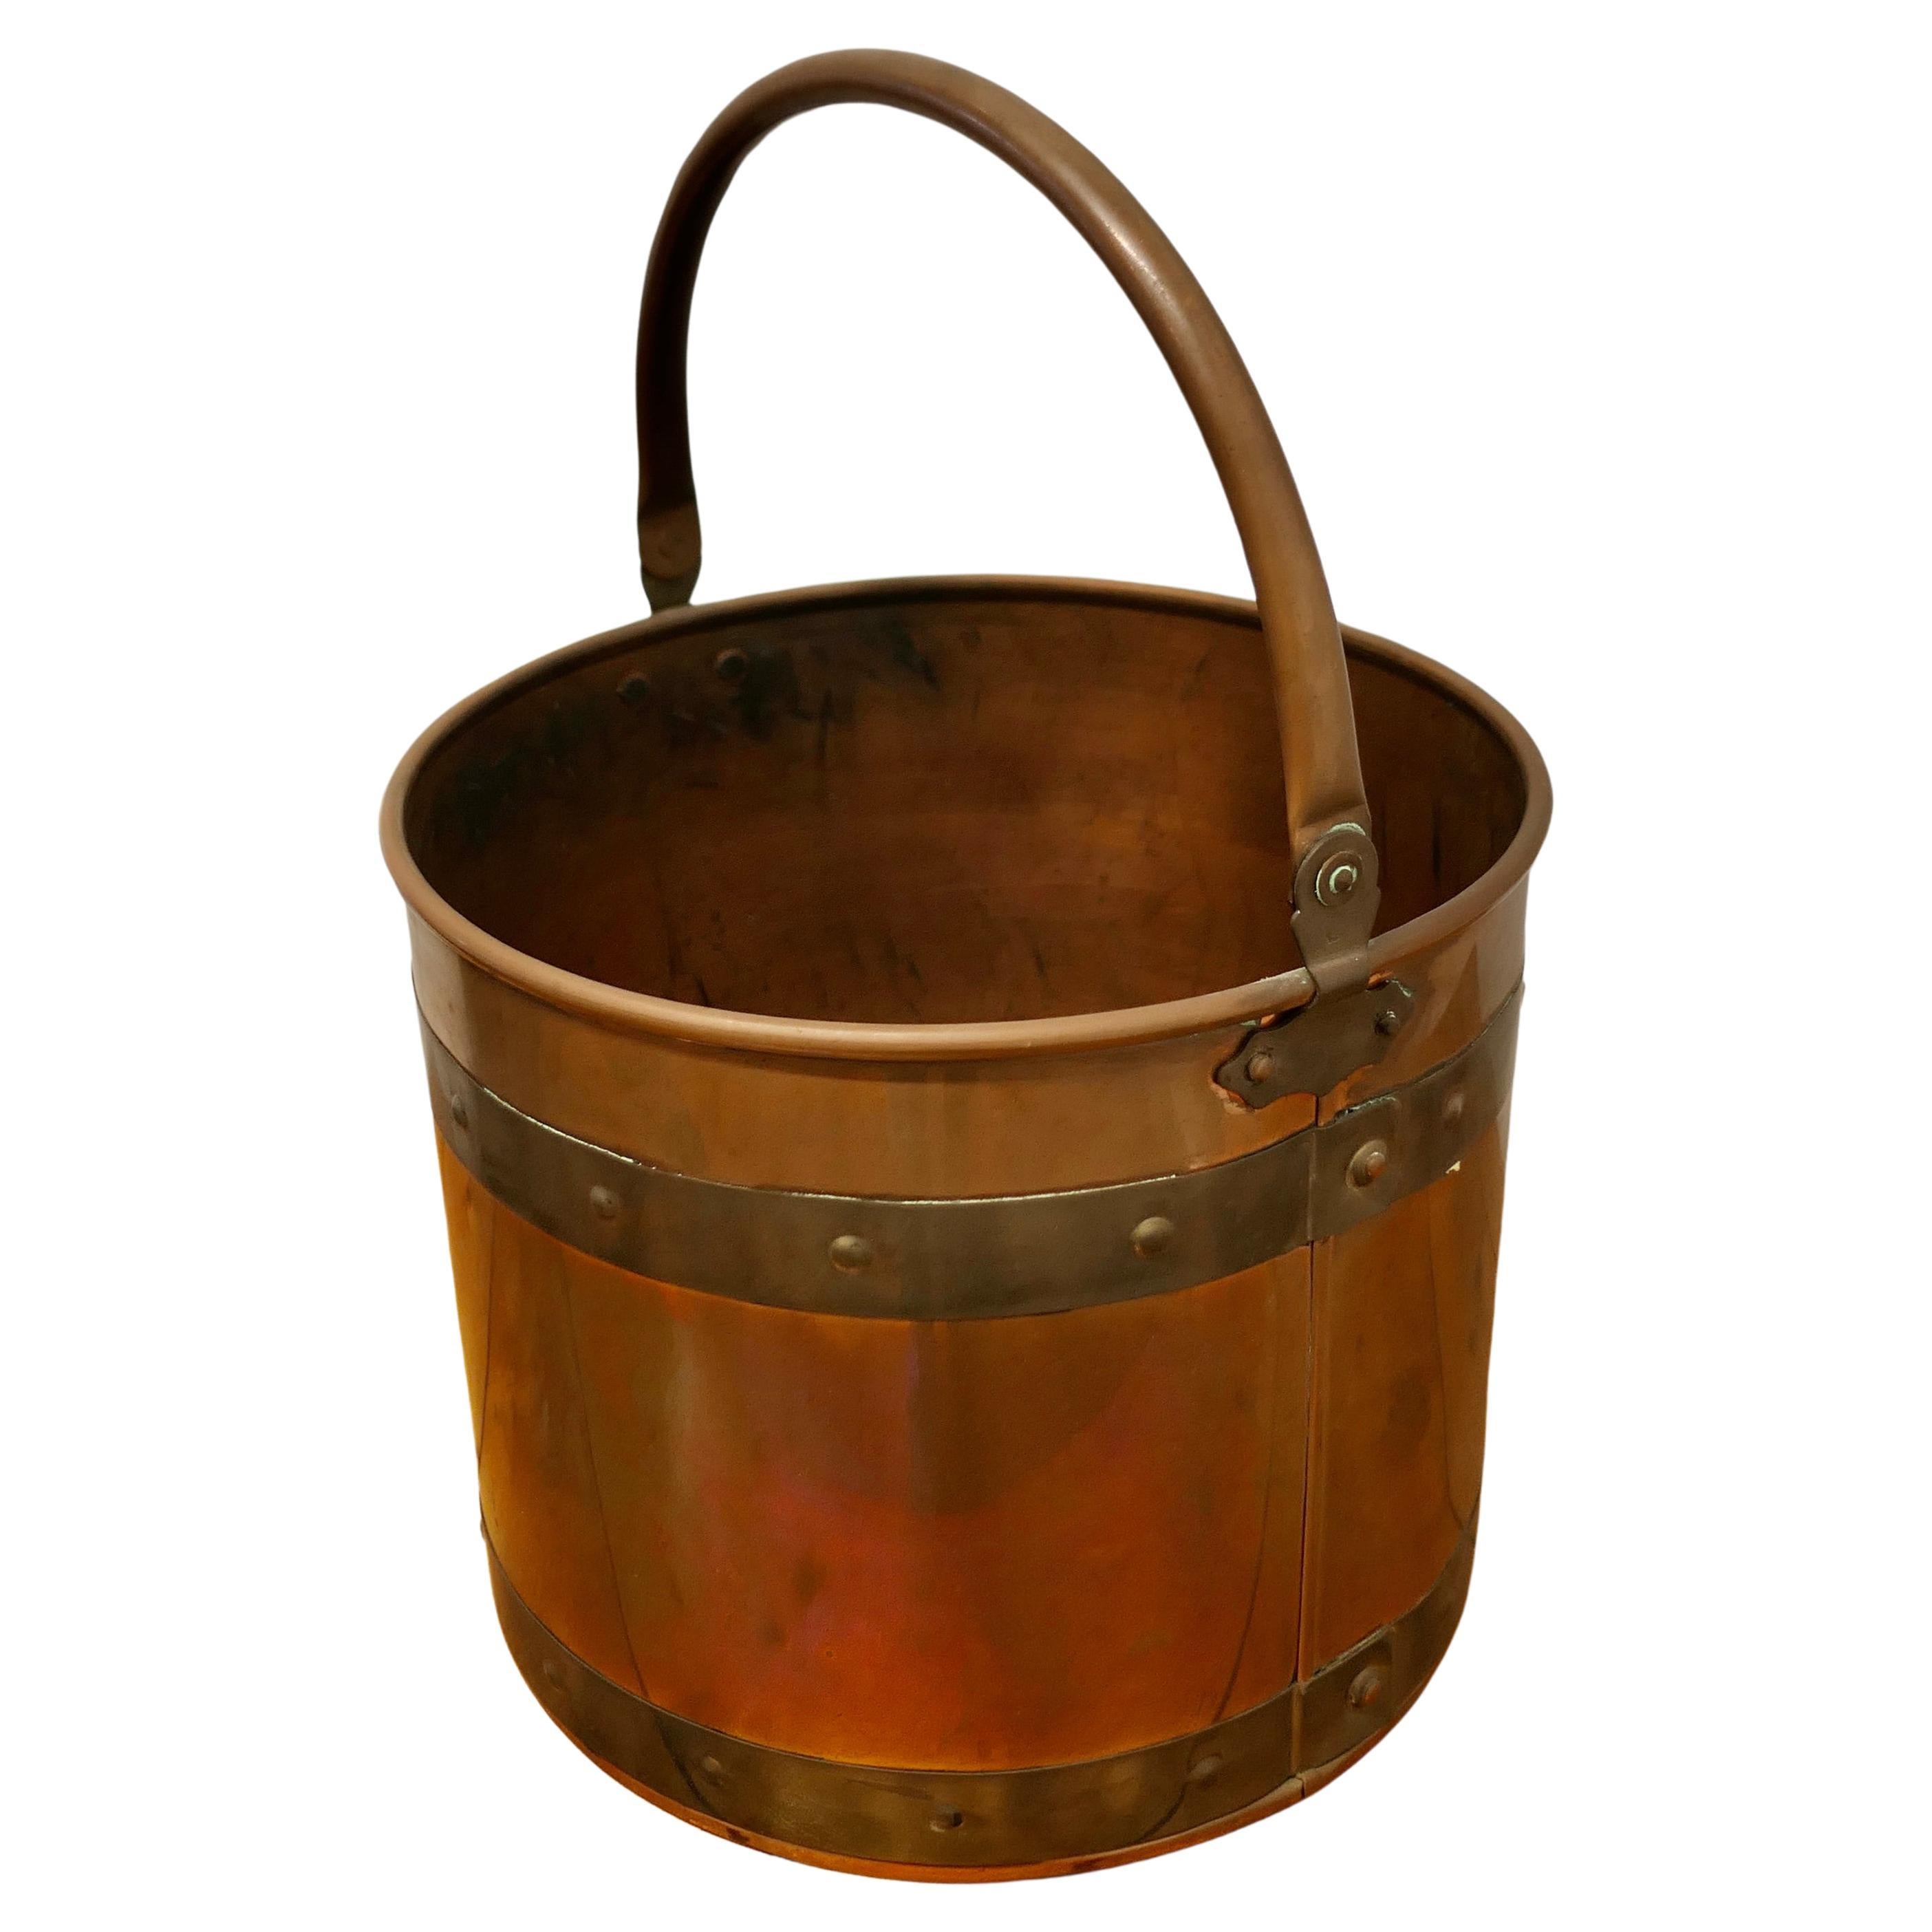 Riveted Copper and Brass Coal Bucket    